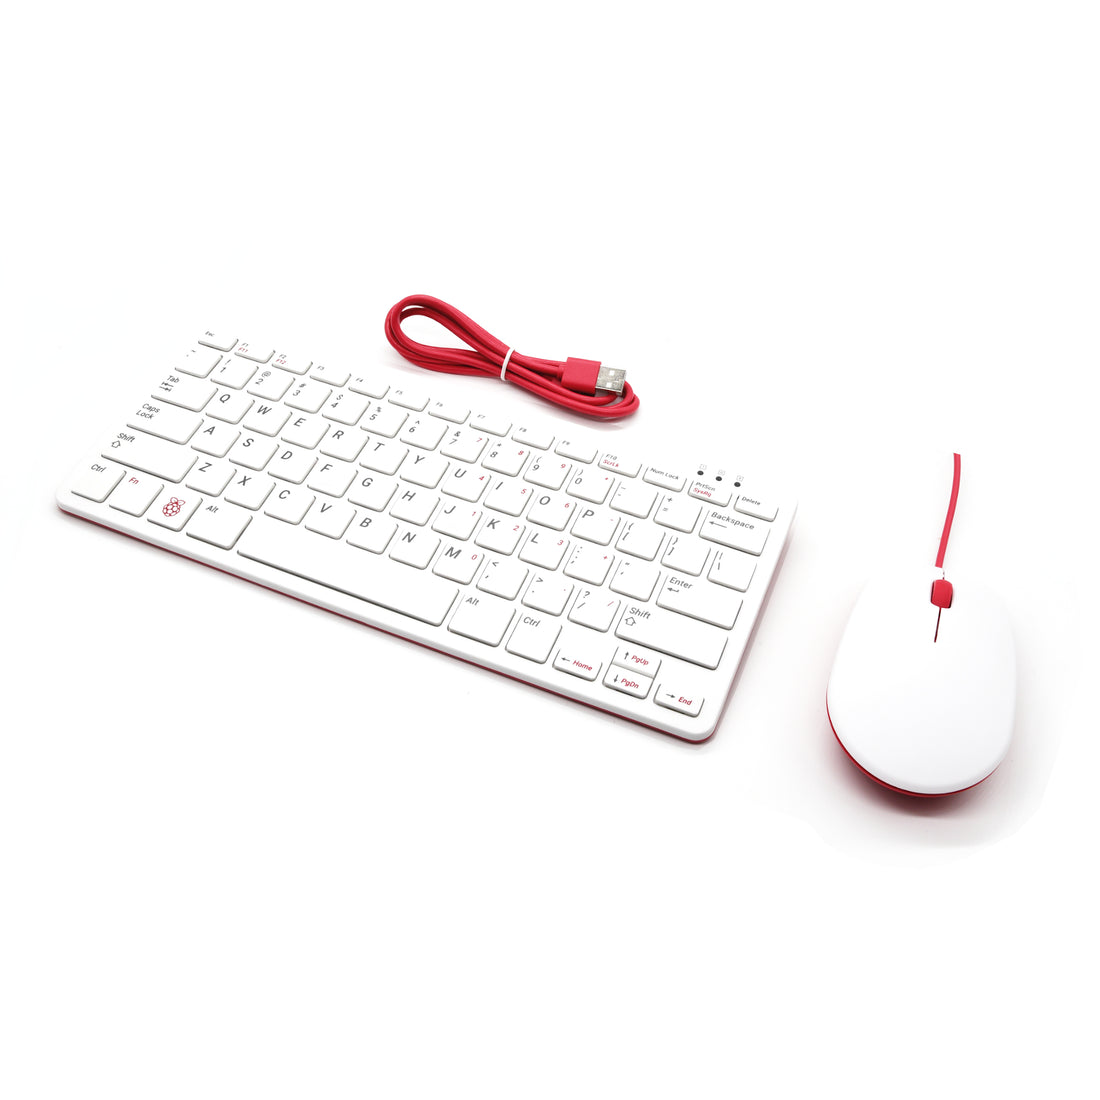 PepperTech Digital Raspberry Pi Official Keyboard and Mouse Education / Industrial Bulk Pack (U.S. version Red/White)